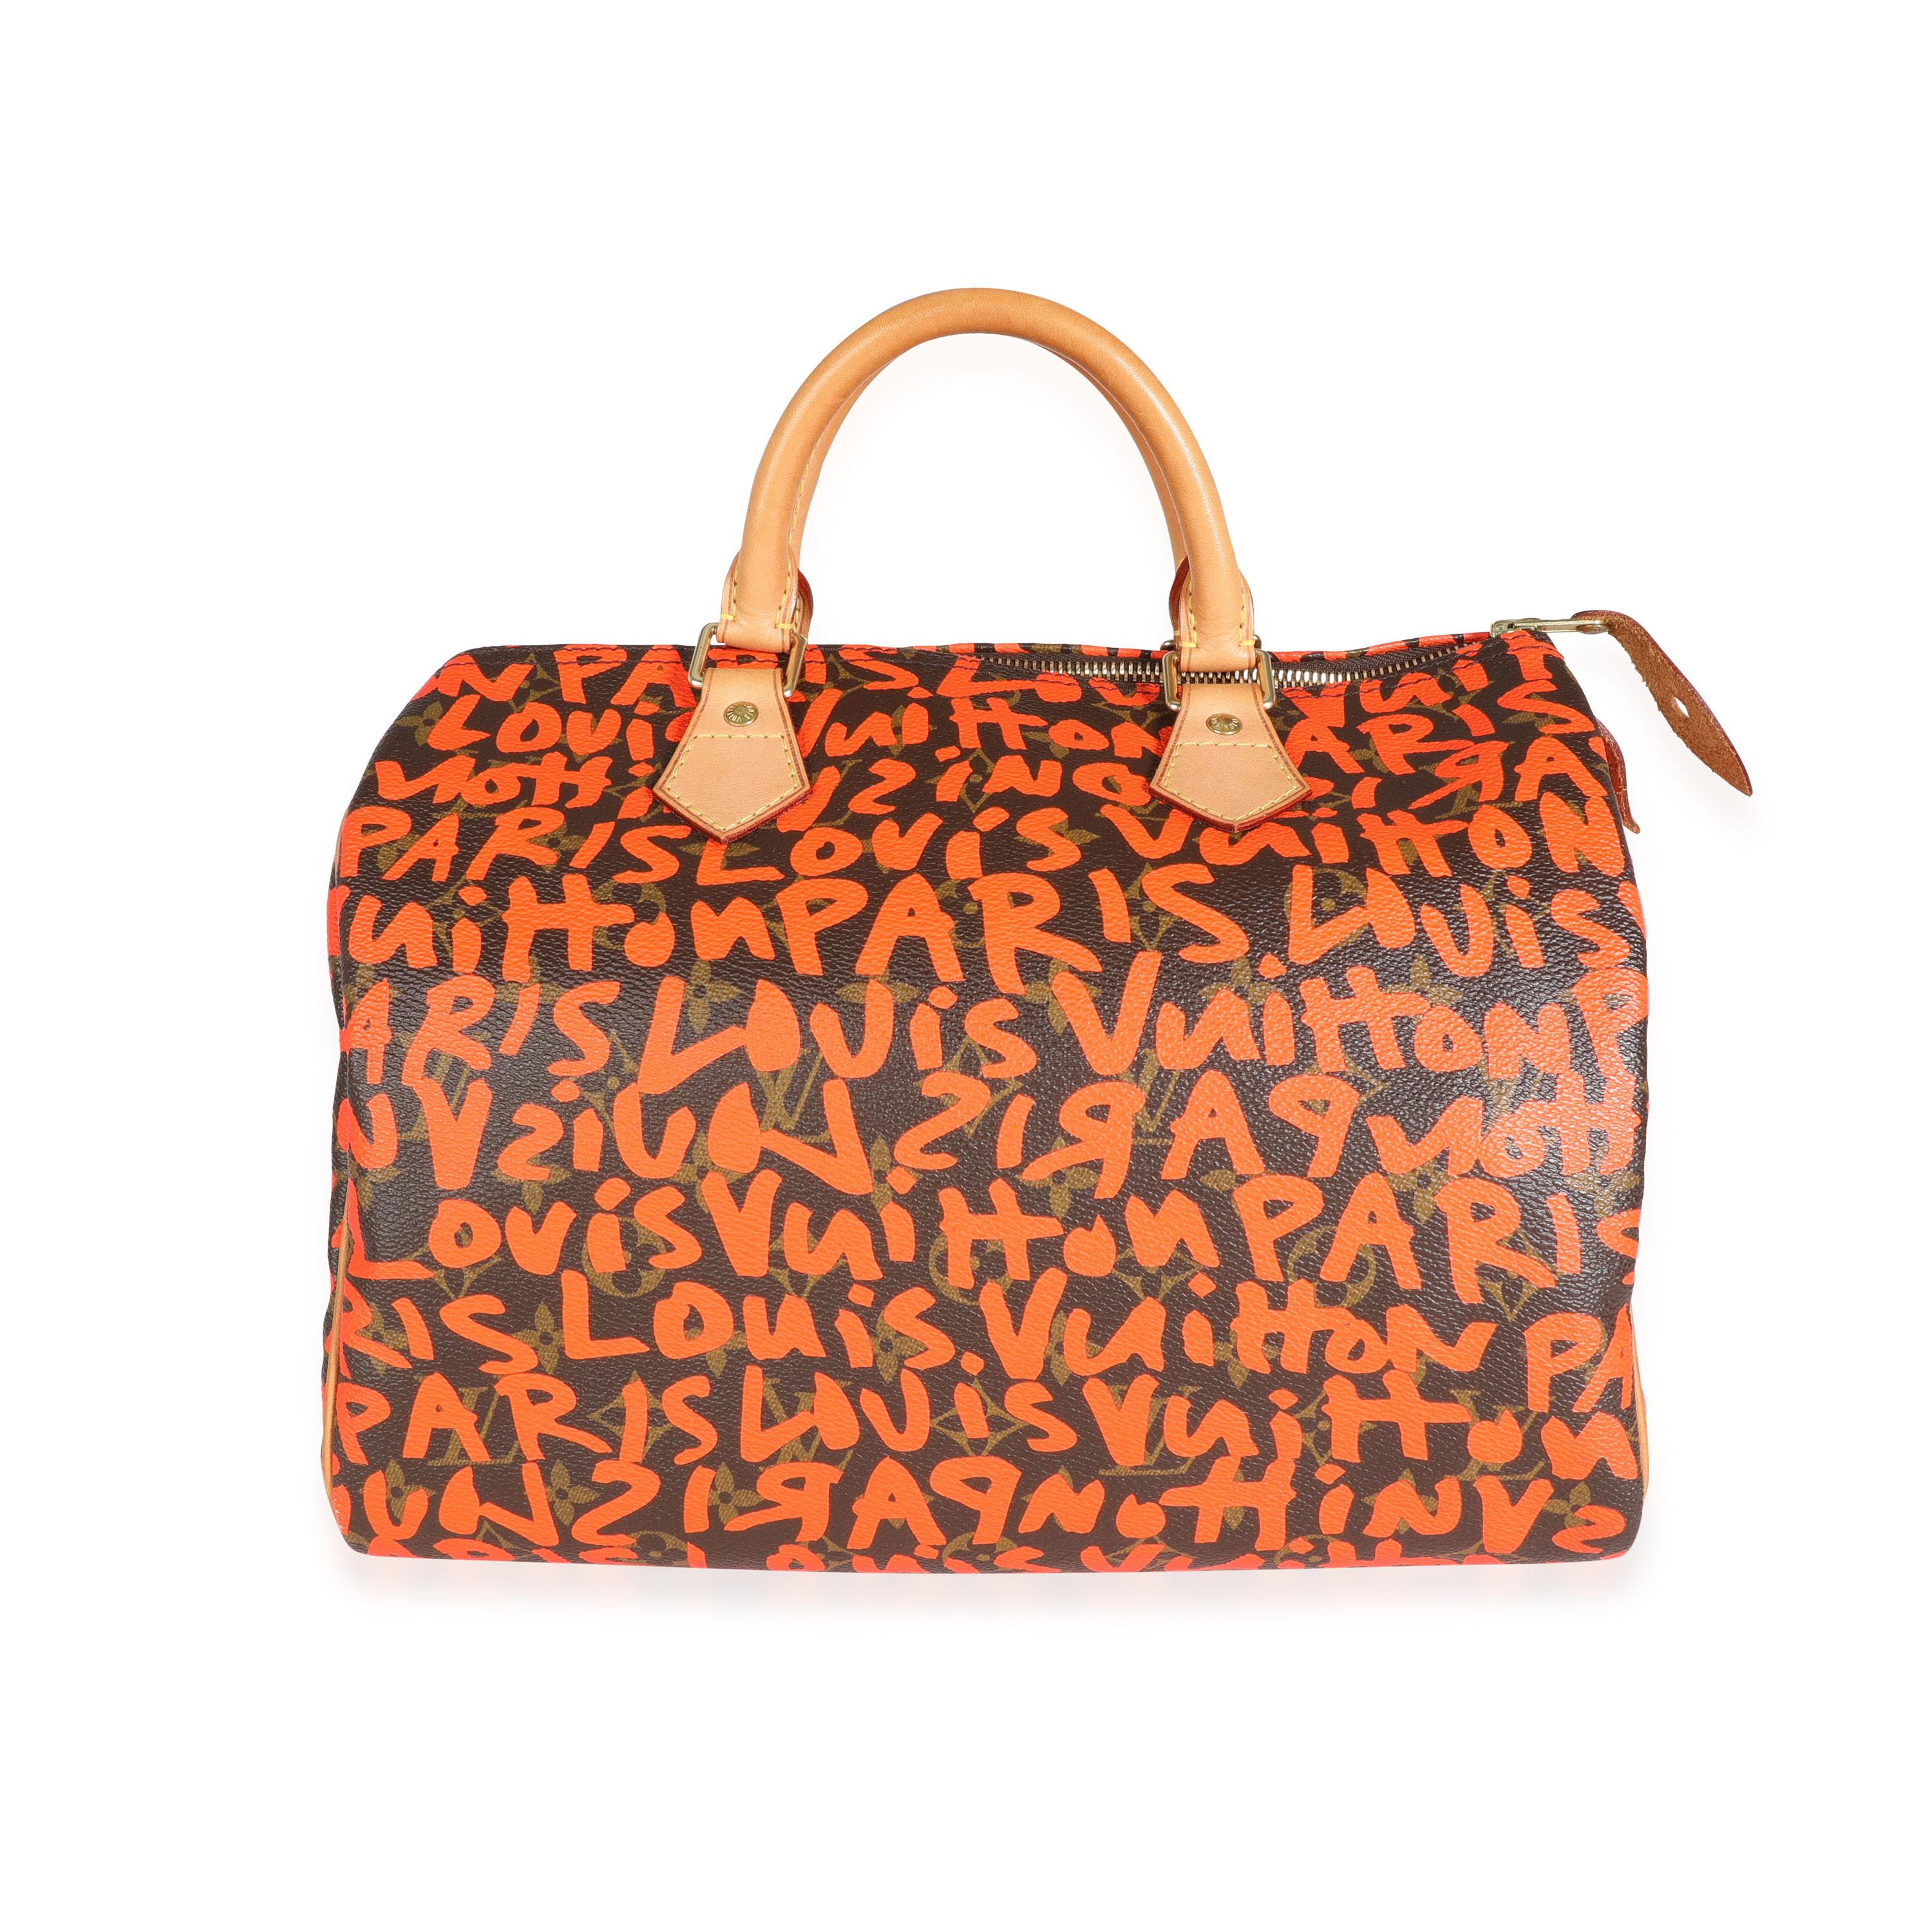 Listing Title: Louis Vuitton x Stephen Sprouse Orange Graffiti Monogram Canvas Speedy 30
SKU: 115898
Condition: Pre-owned (3000)
Condition Description: The Speedy is the ultimate everyday bag; featured in a variation of Louis Vuitton's classic